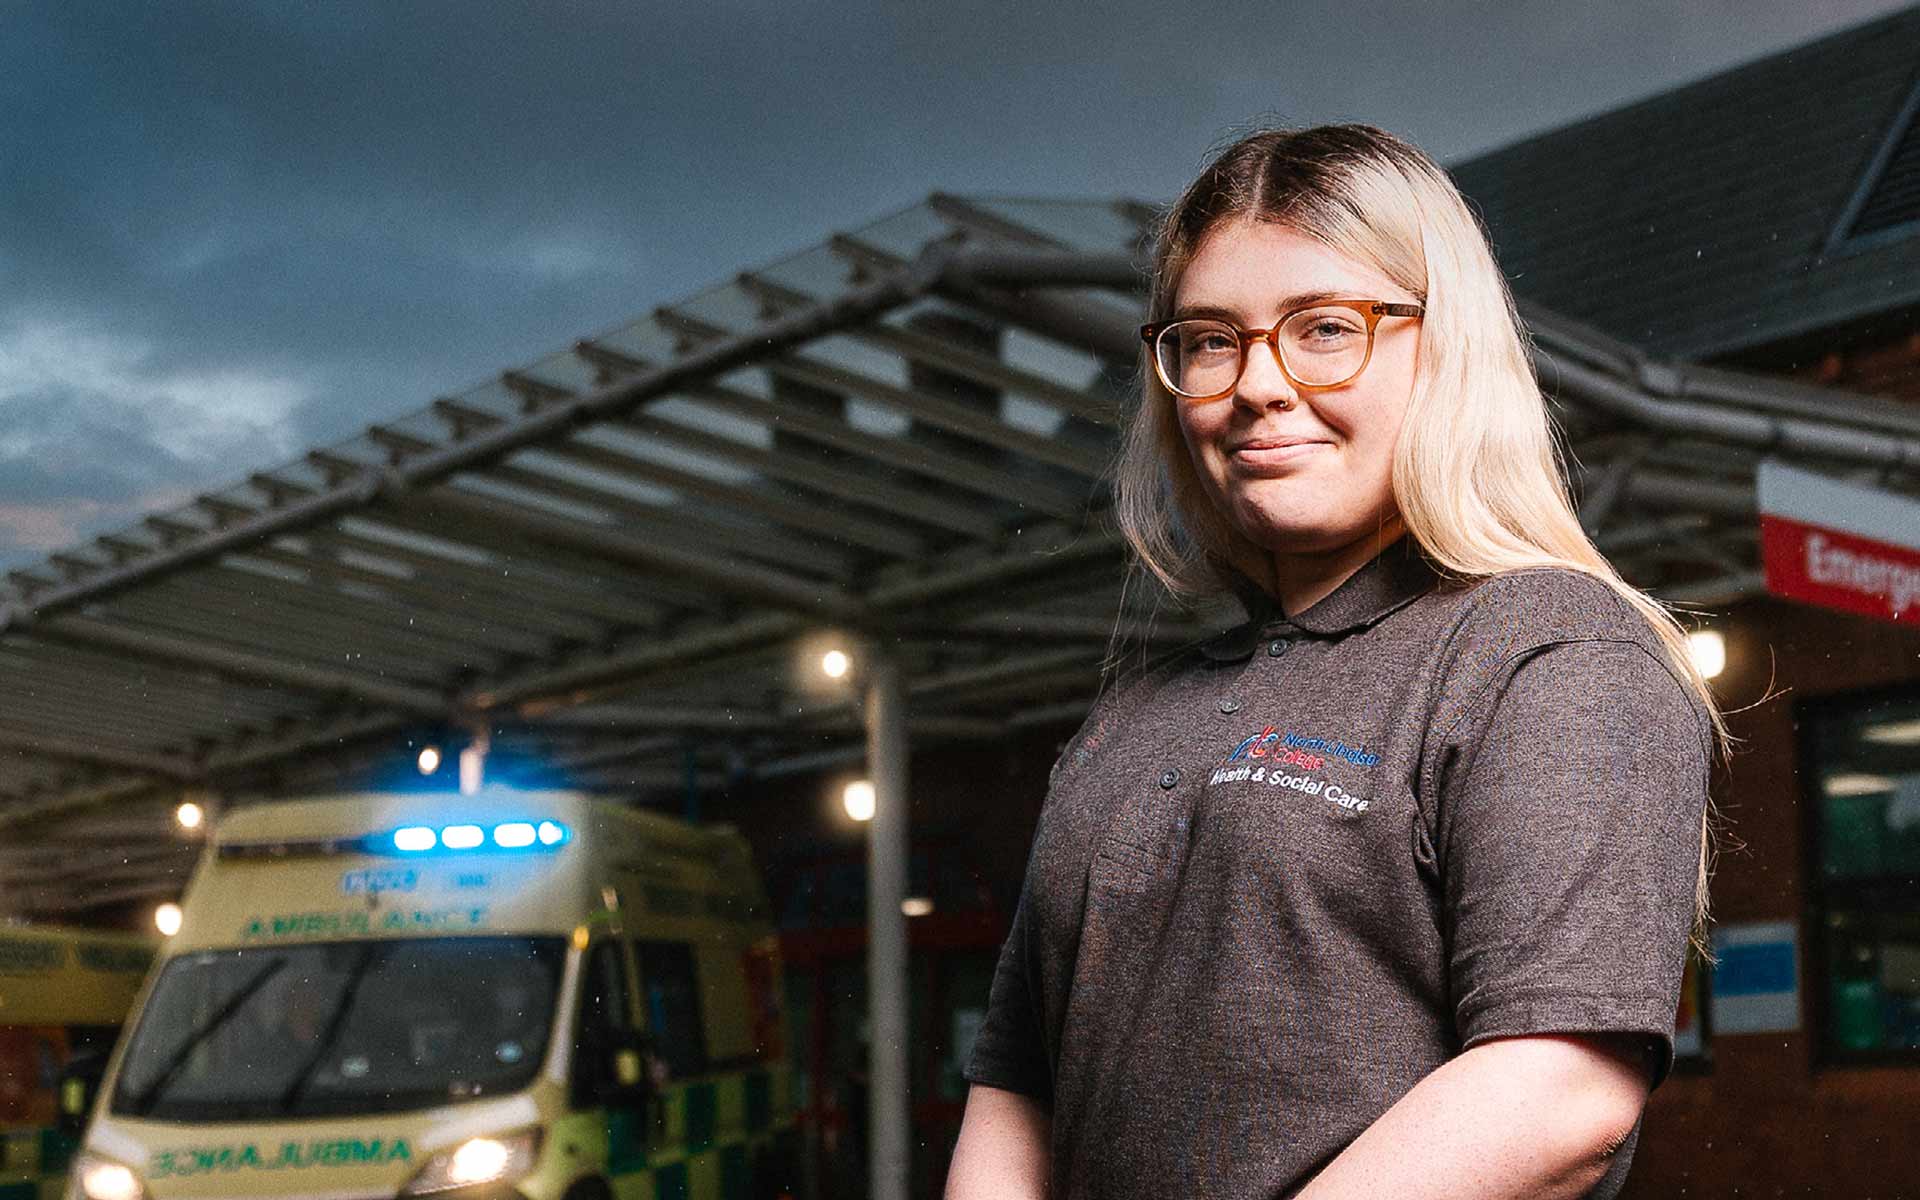 Stood outdoors at the entrance to a hospital emergency department, student Taylor smiles towards us. Behind, an ambulance with flashing blue lights waits parked under a large canopy roof.